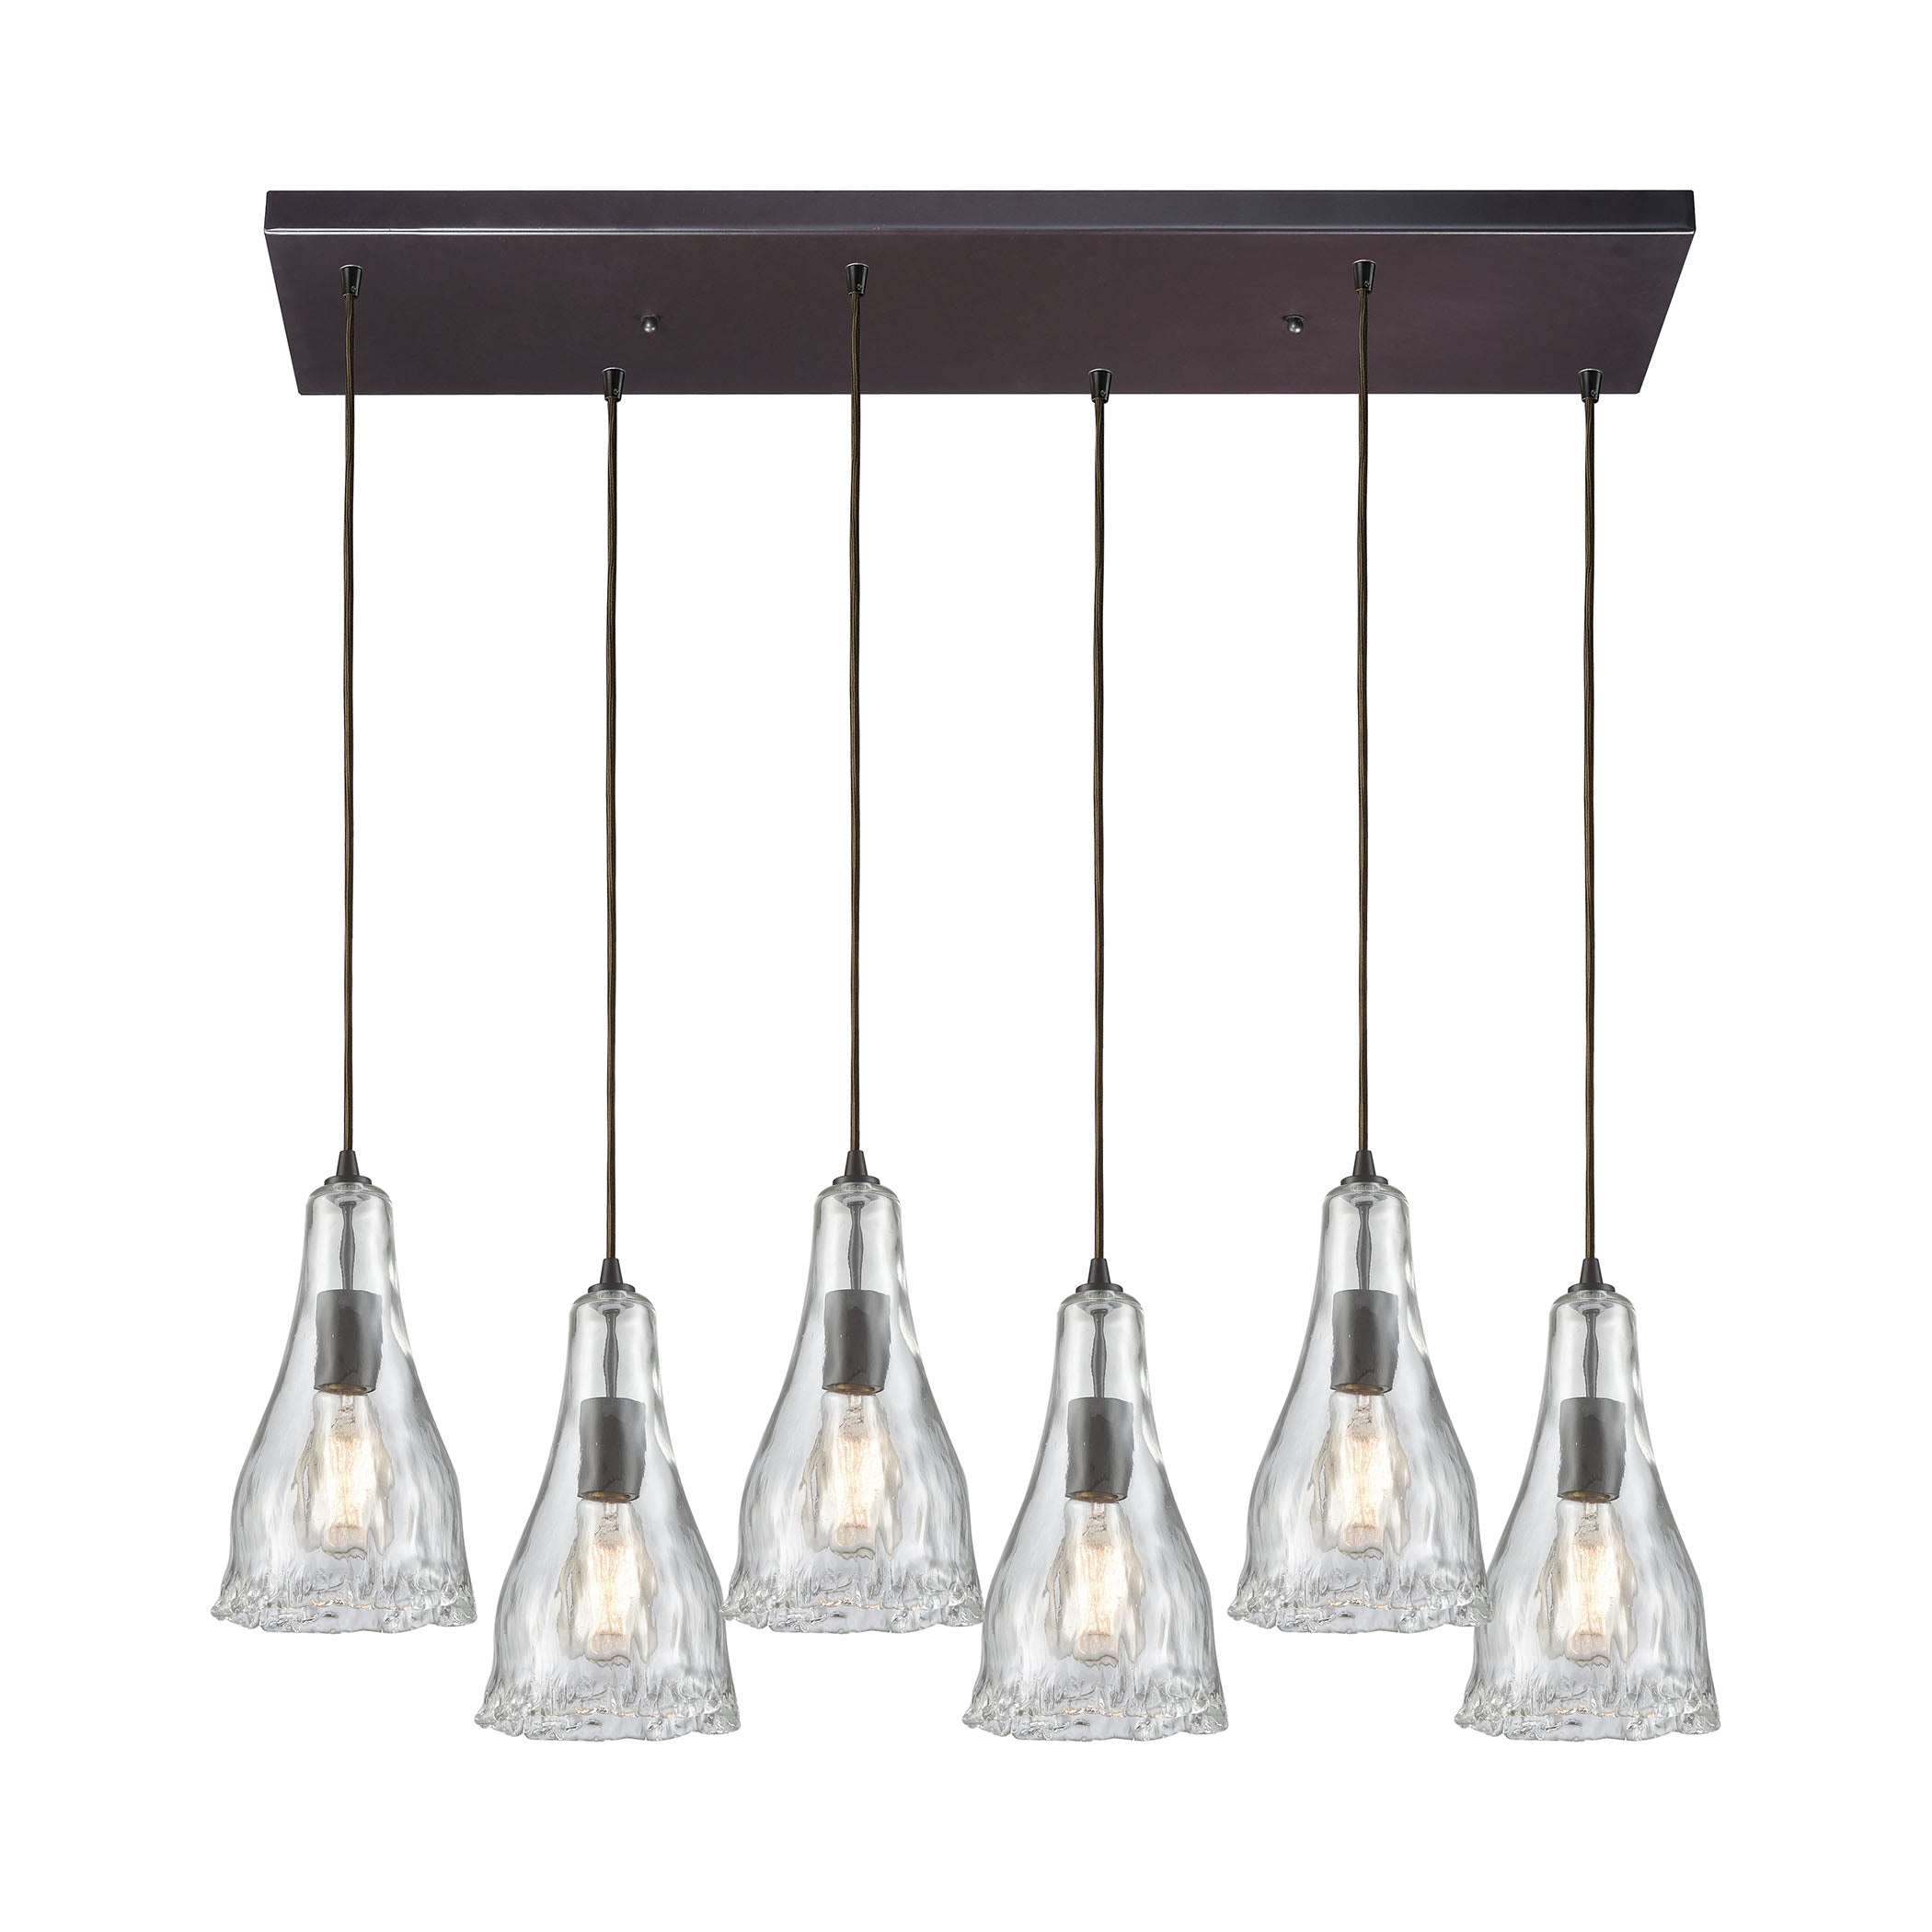 ELK Lighting 10446/6RC Hand Formed Glass 6-Light Rectangular Pendant Fixture in Oiled Bronze with Clear Hand-formed Glass